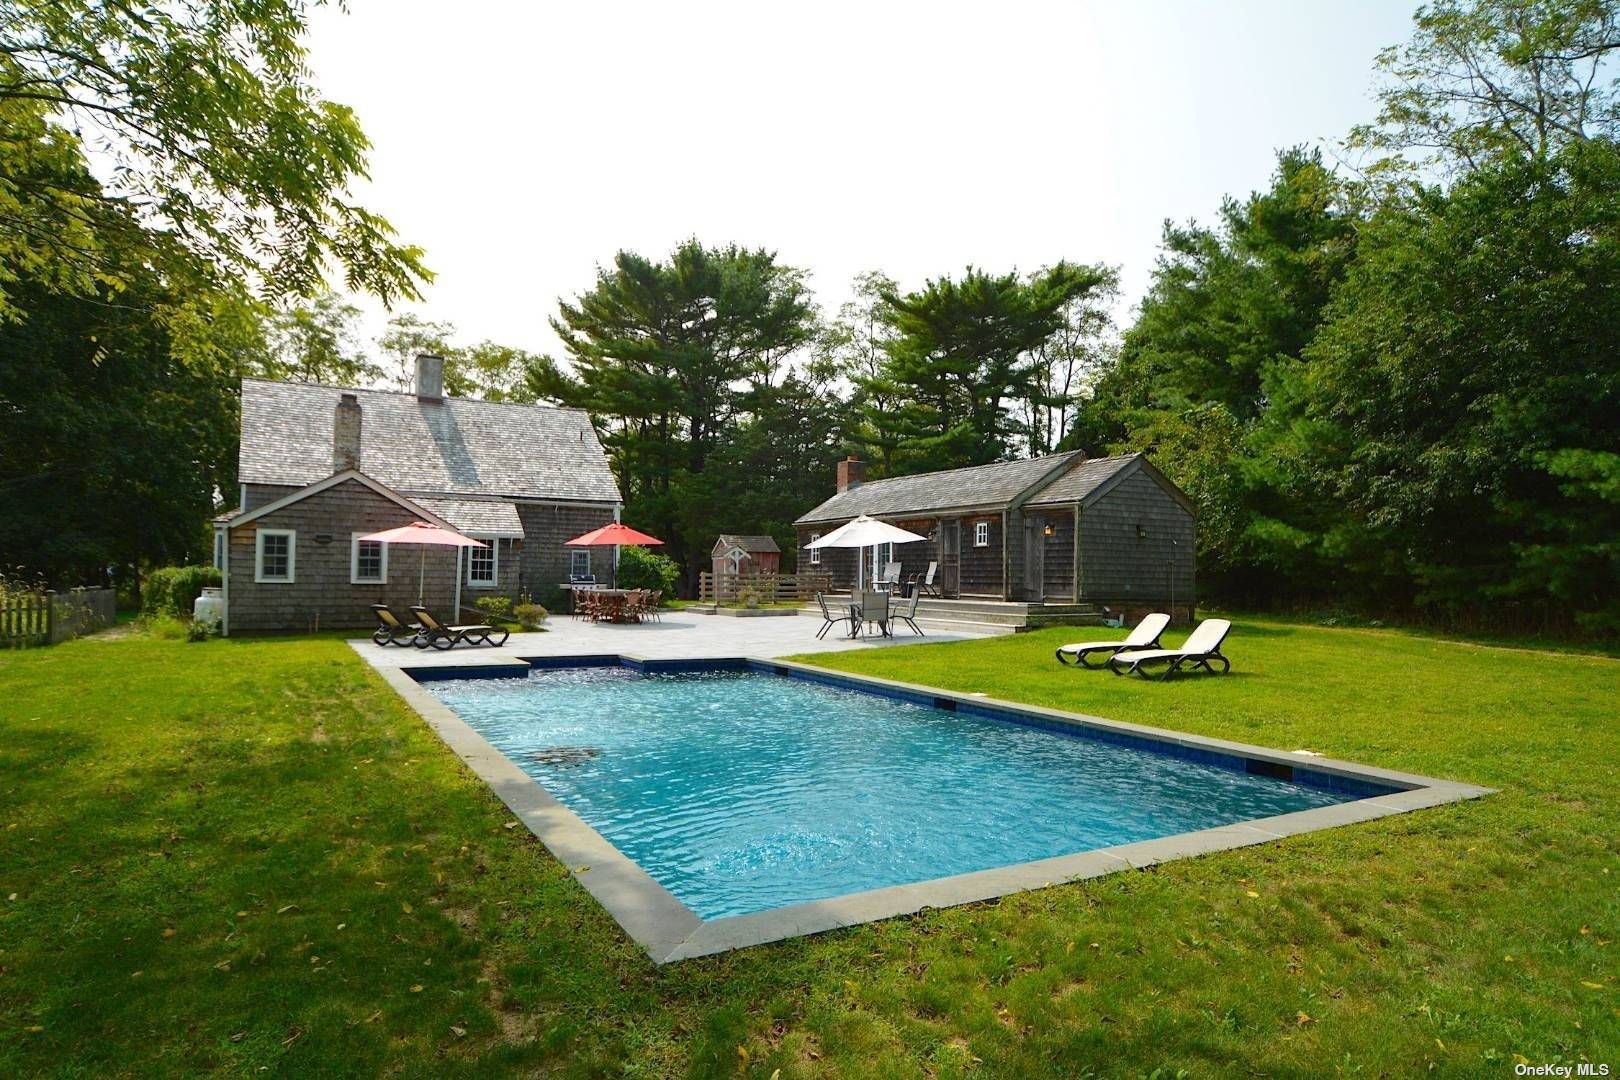 Magnificently restored historic farmhouse with heated, Gunite pool on private, shy 2 acres.